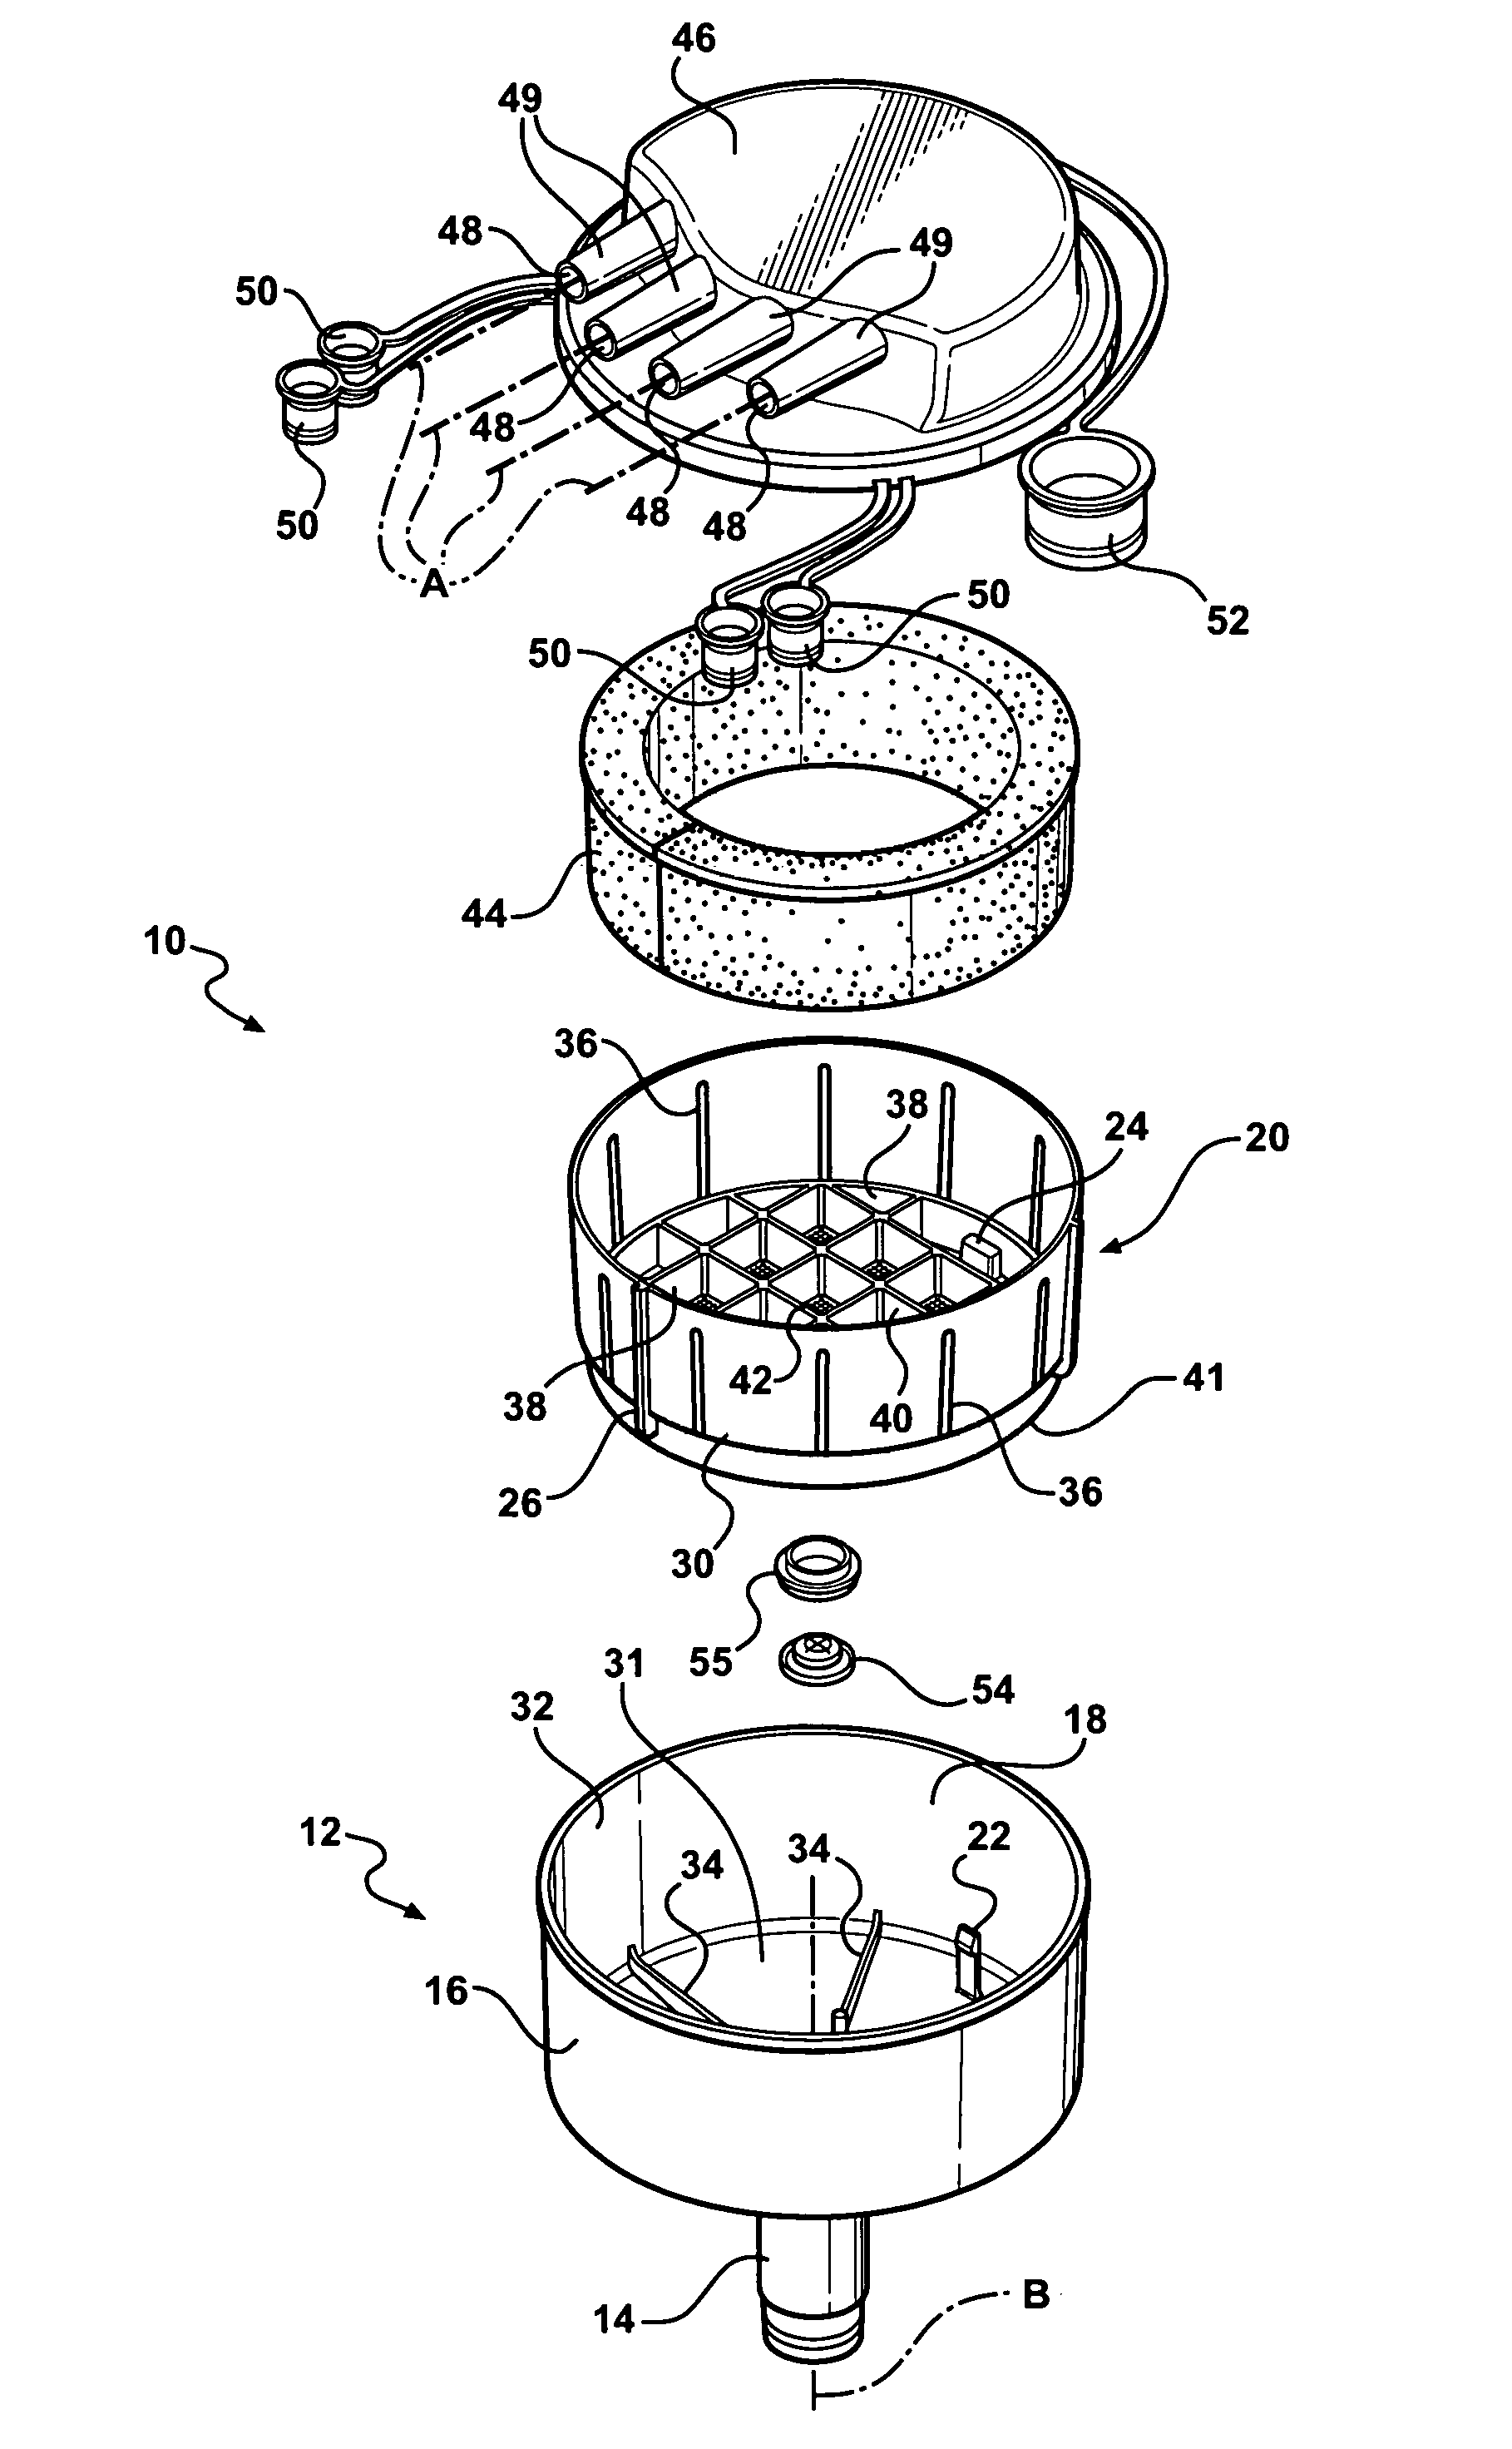 Manifold and filter assembly with filter basket